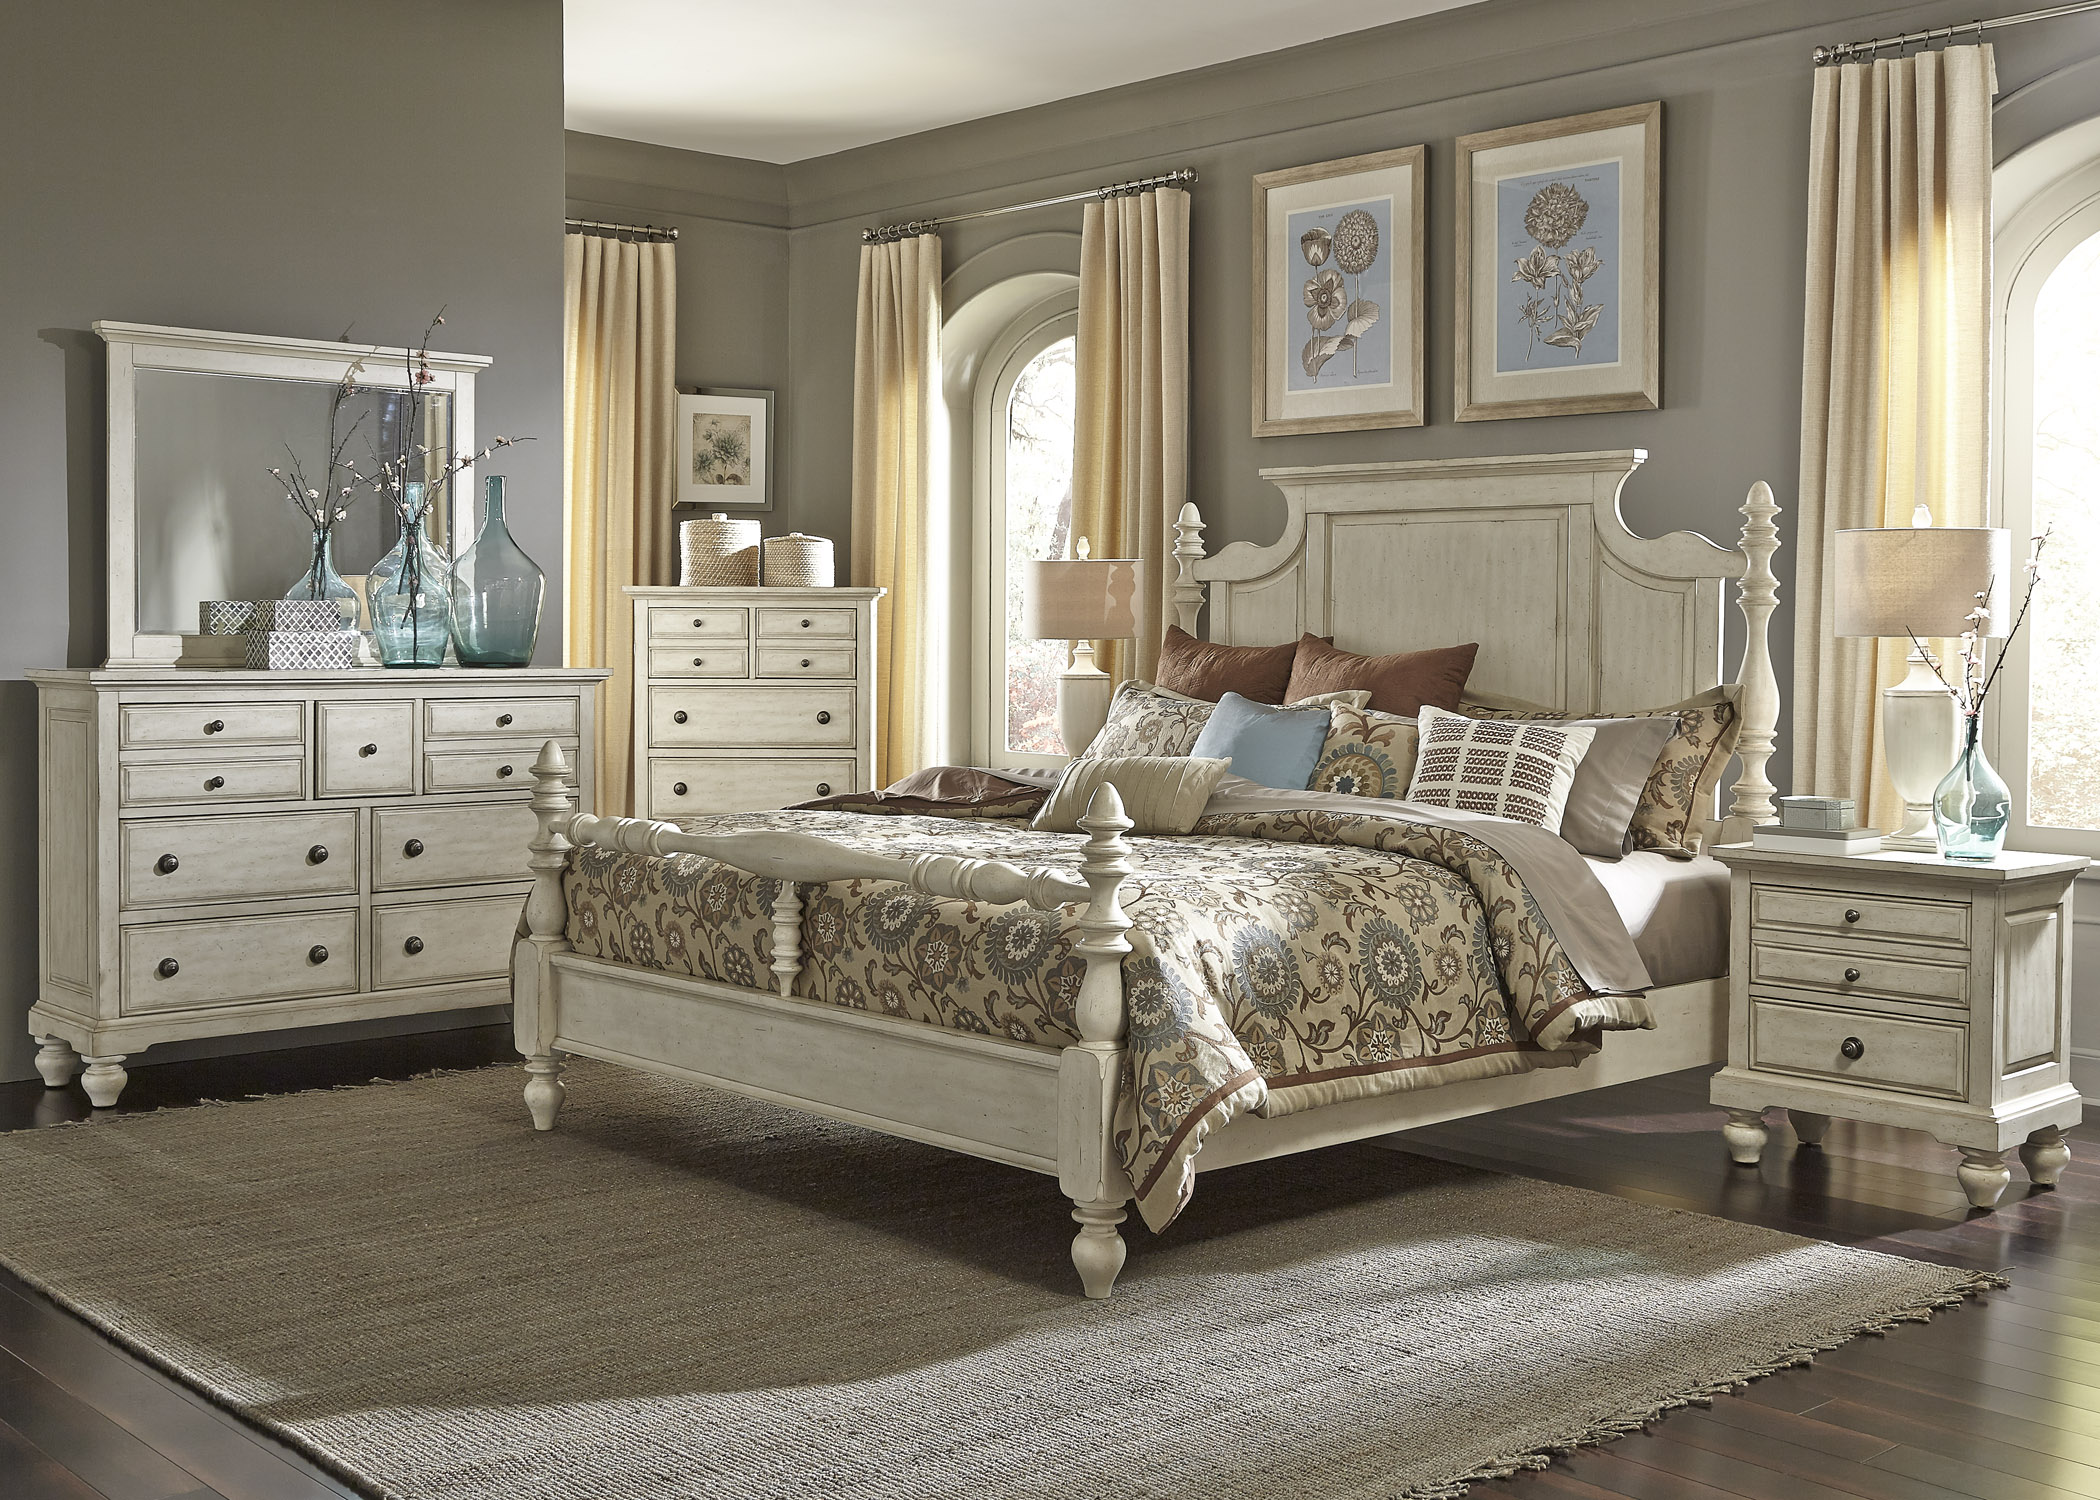 Liberty Furniture High Country Bedroom King Poster Bed, Dresser, Mirror and Night Stand Collection